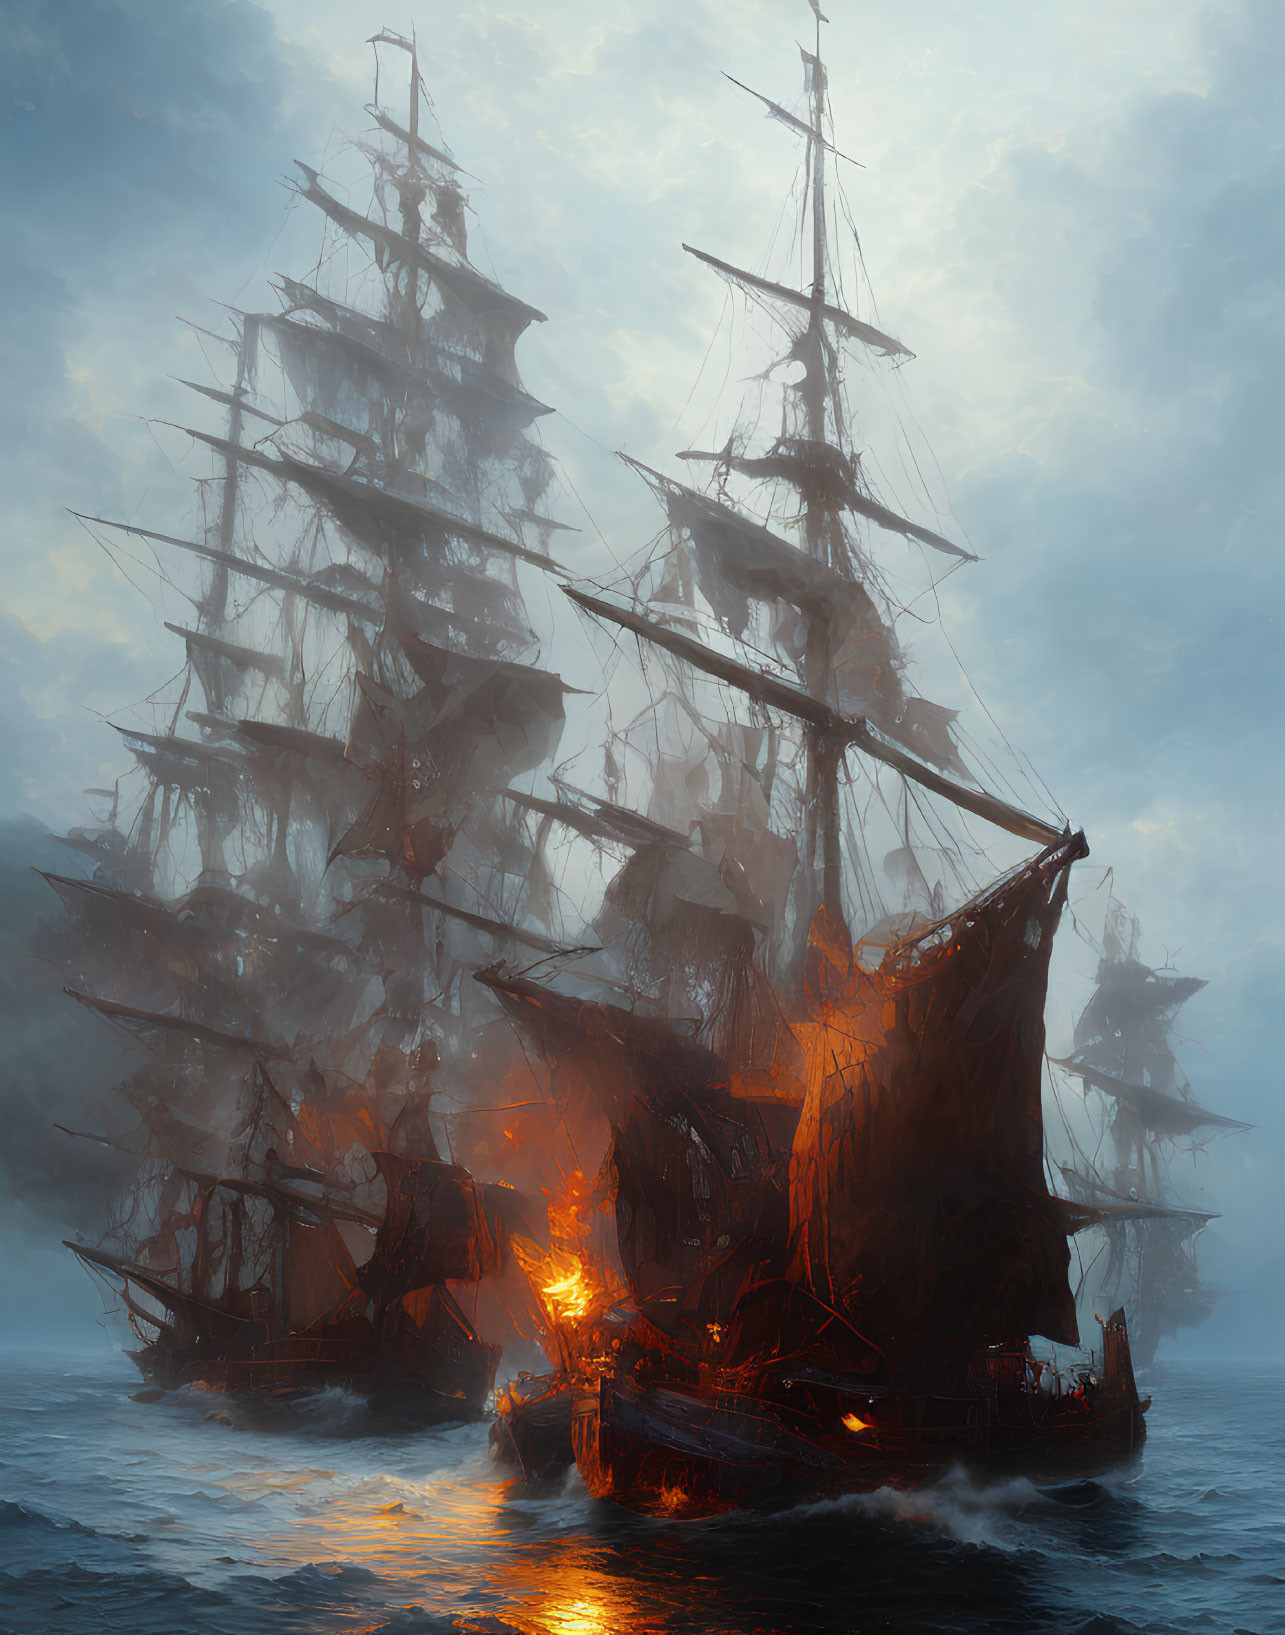 Dramatic tall ships on foggy seas with one ship on fire